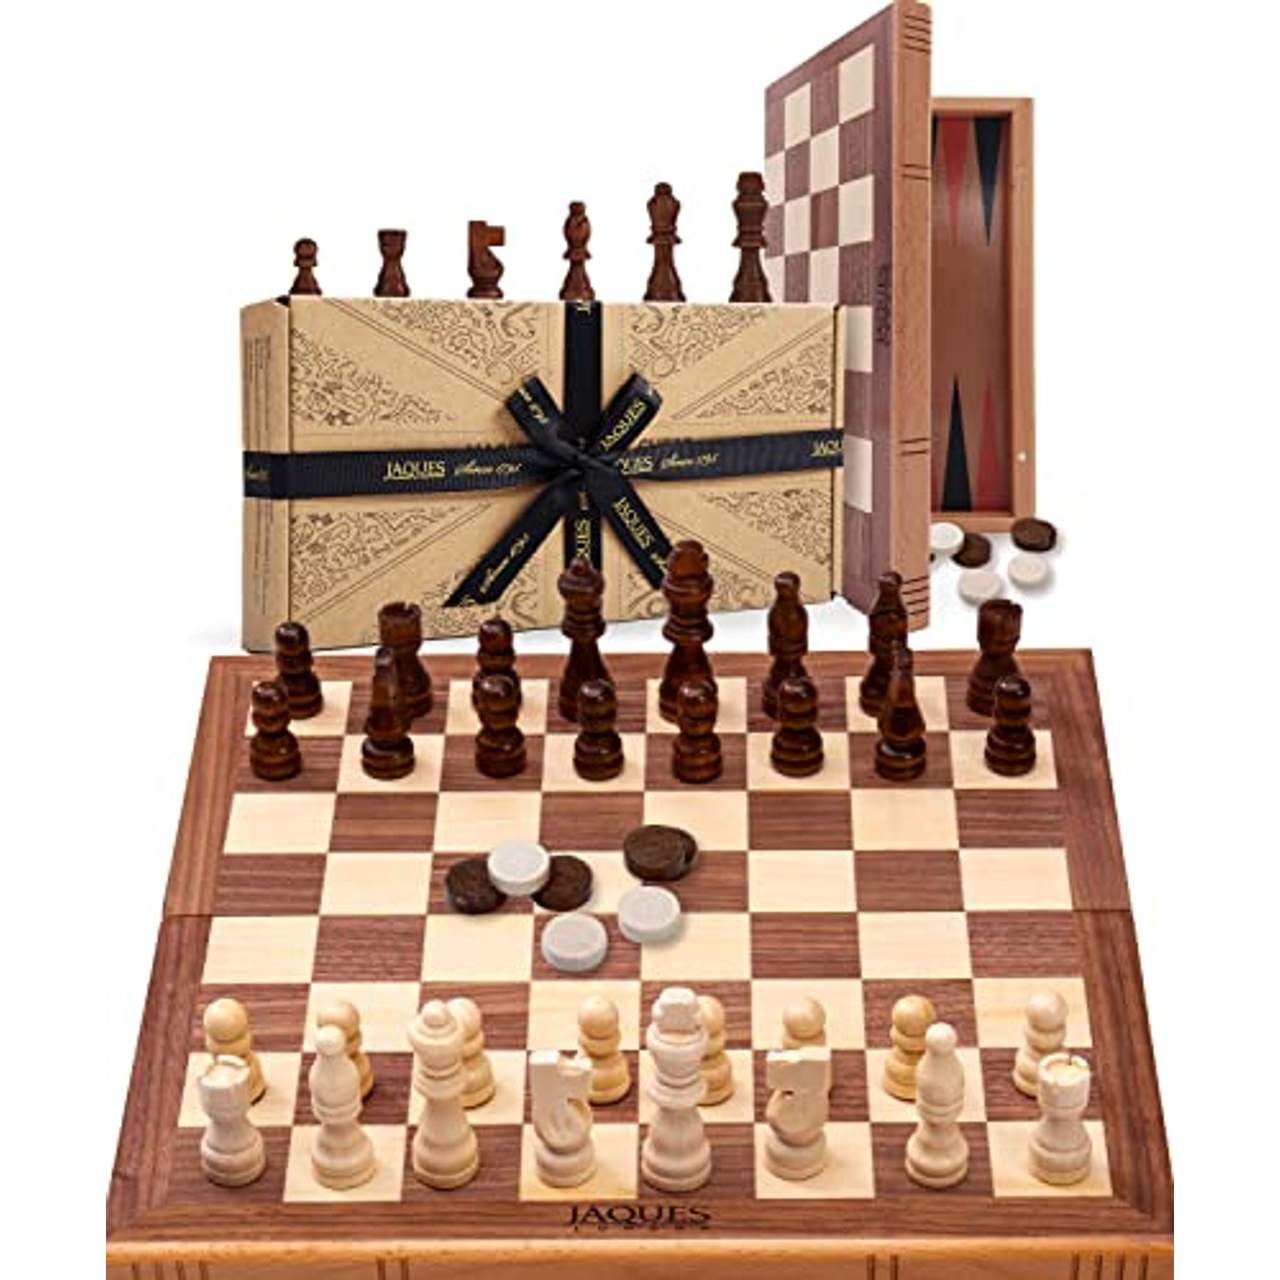 Jaques of London Premiere Chess Holz und Schachbrett Holz